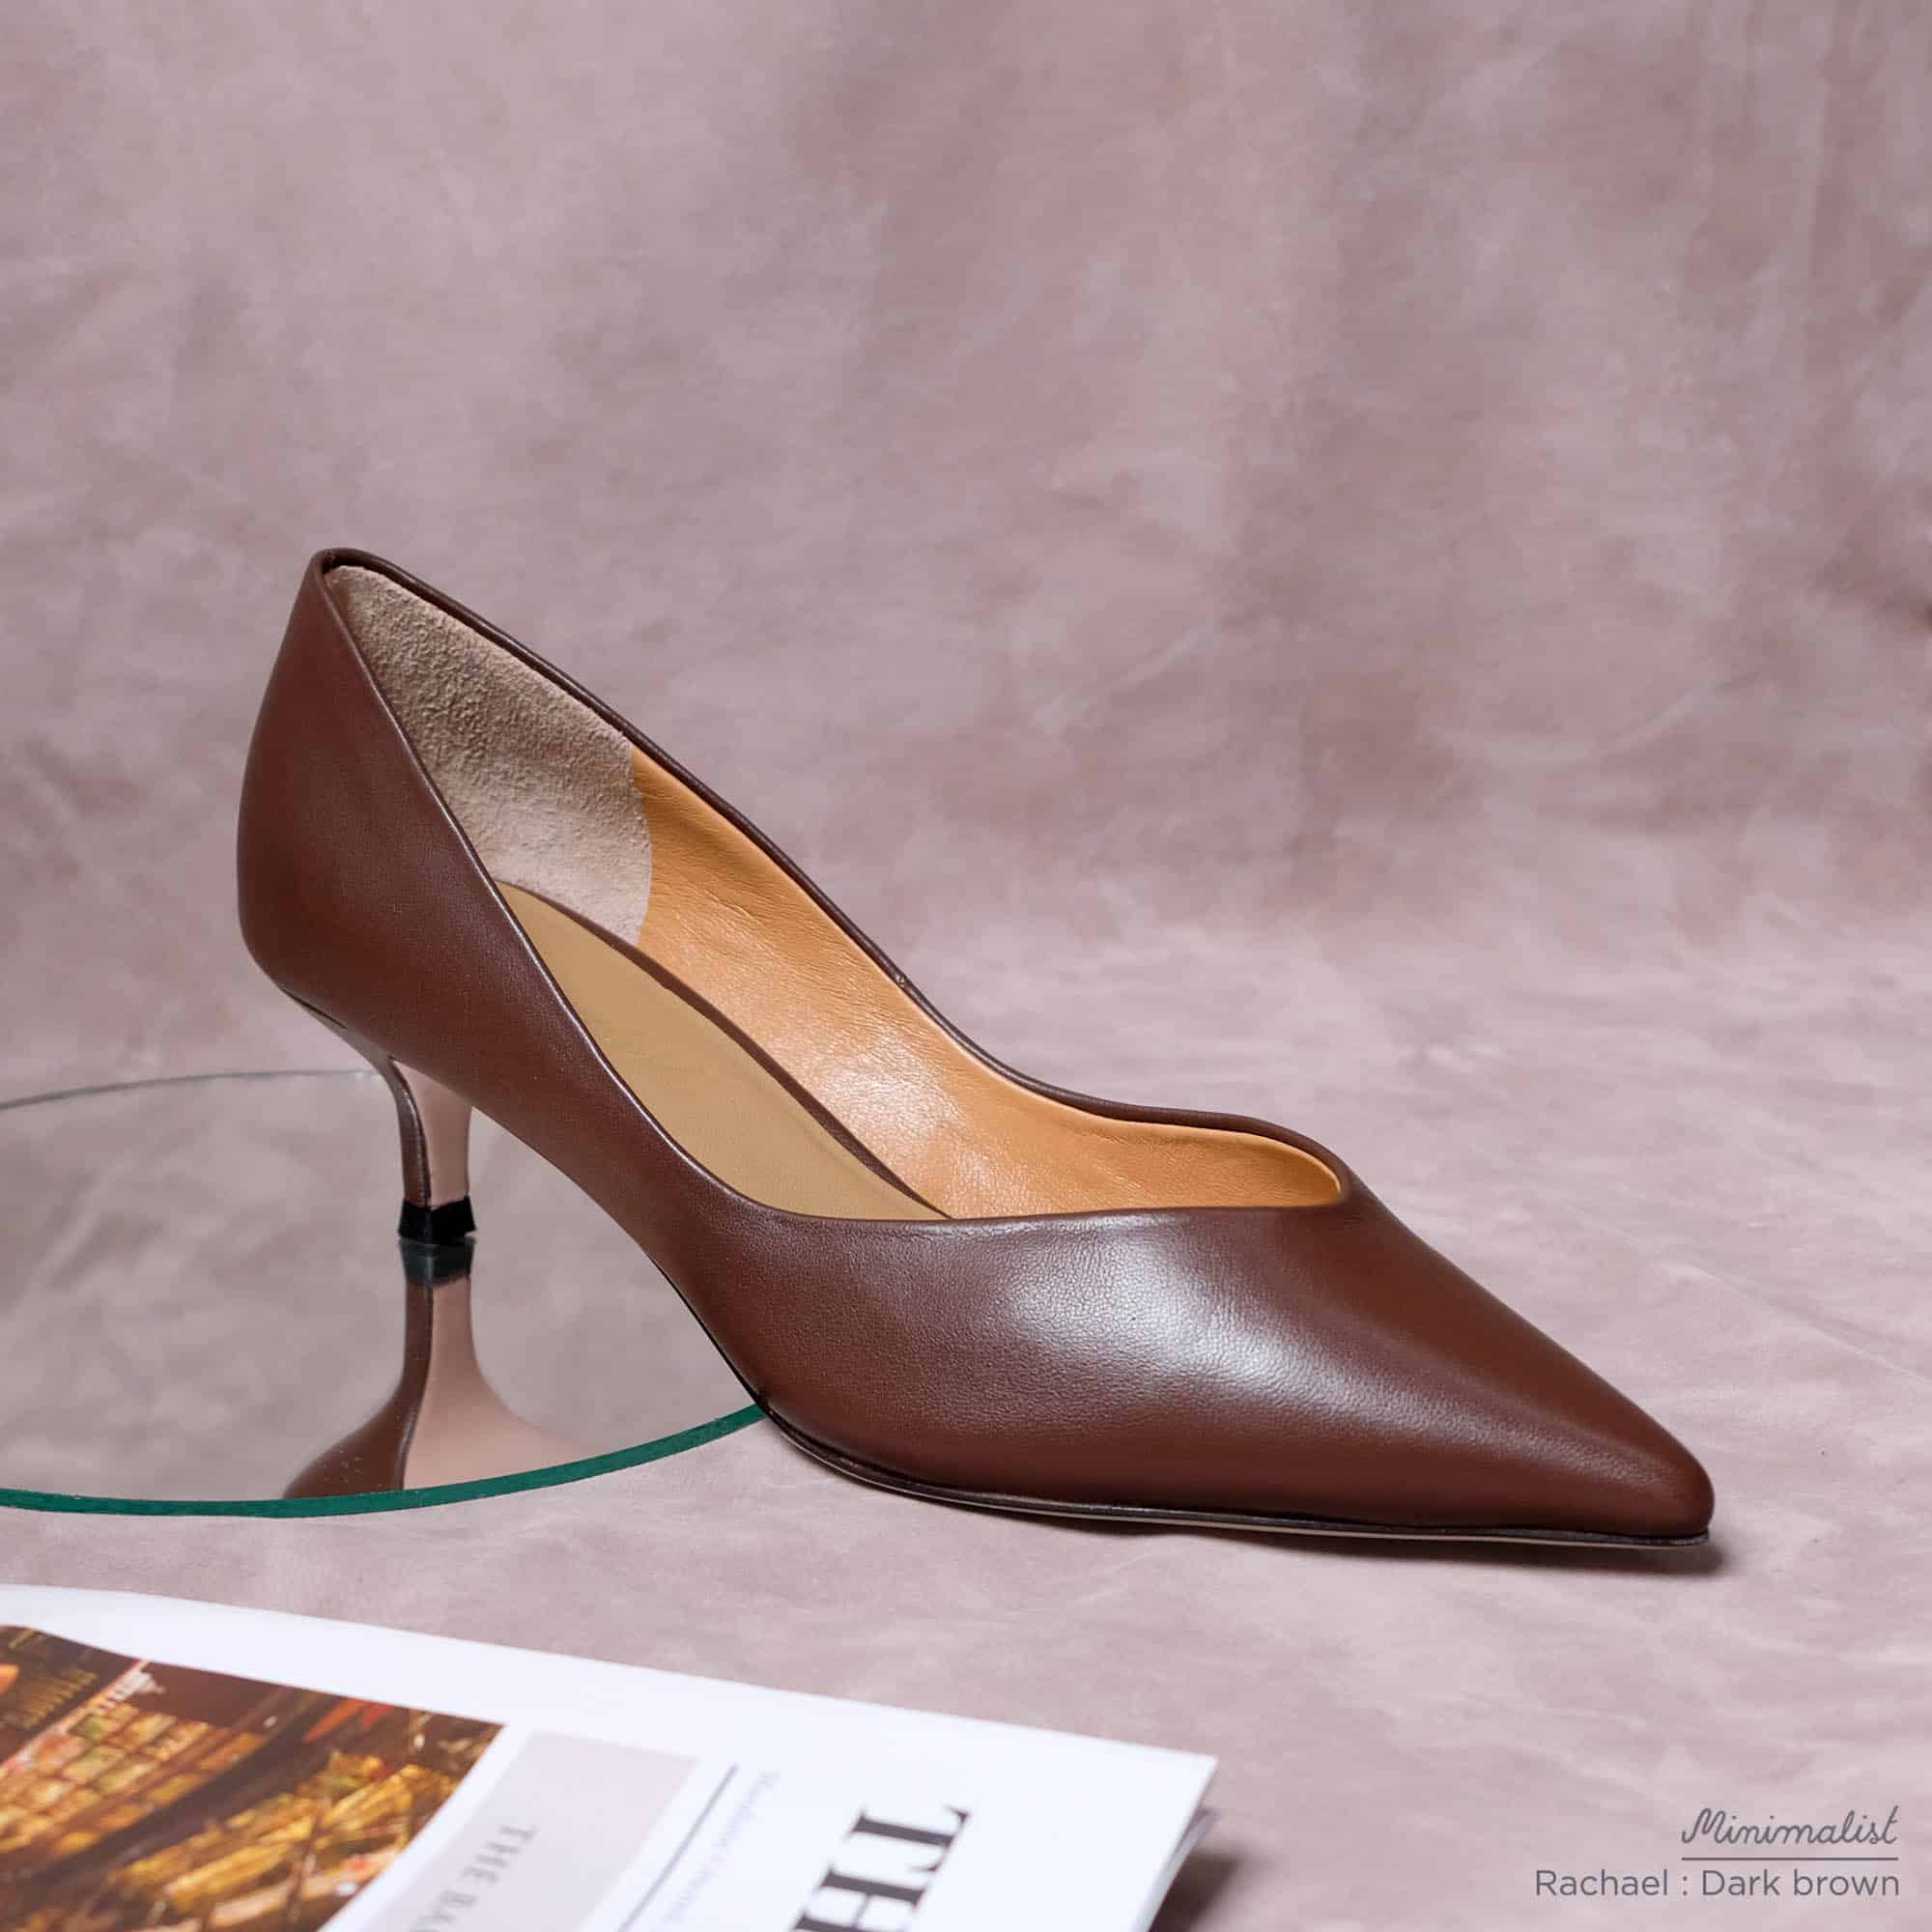 Buy Taupe Platform High Heels Stiletto Pumps for Women Online in India